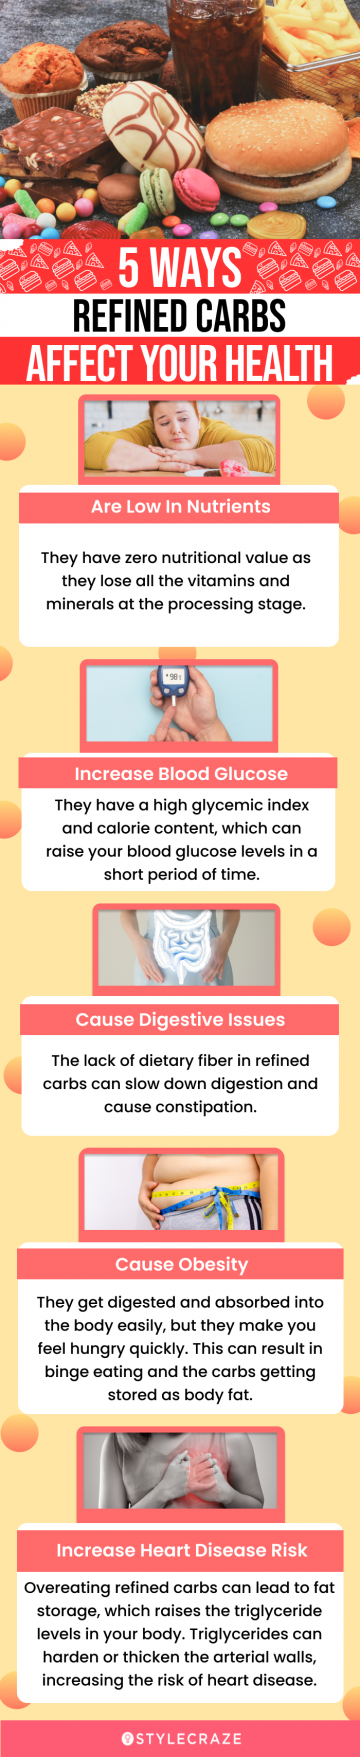 5 ways refined carbs affect your health (infographic)